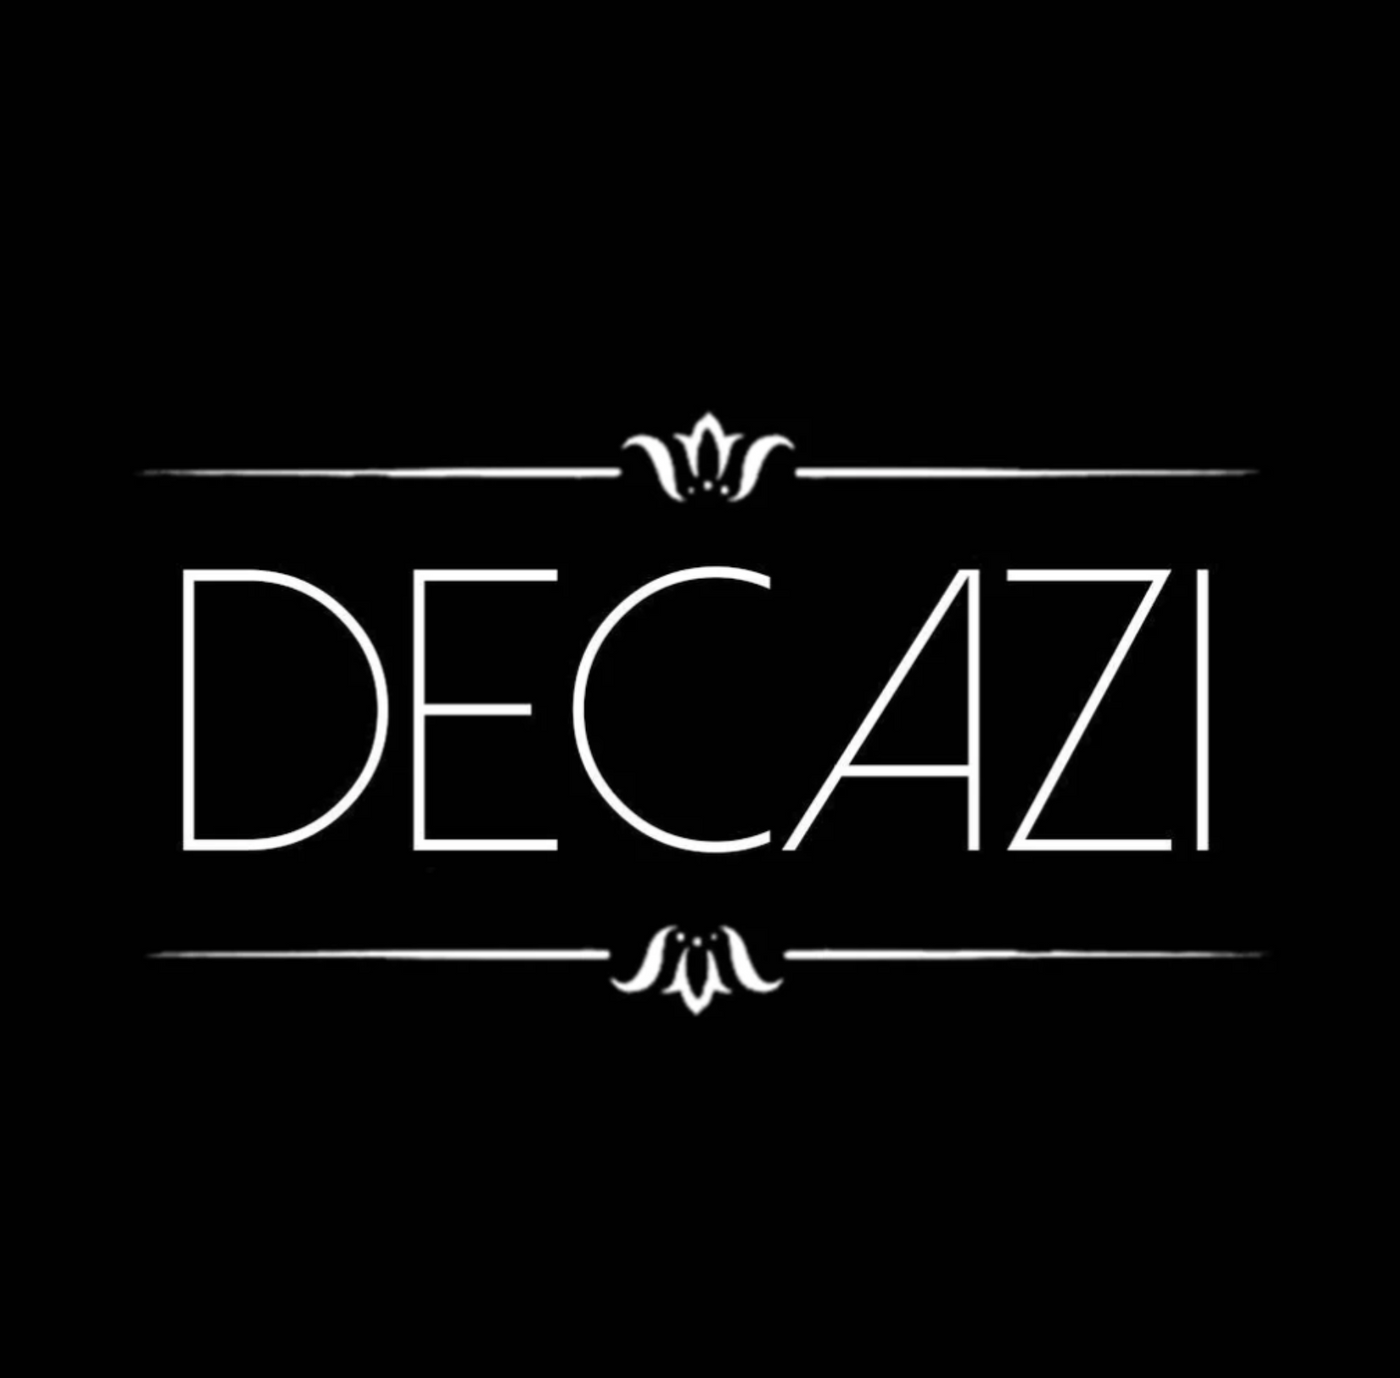 Shipping costs Canada - Decazi